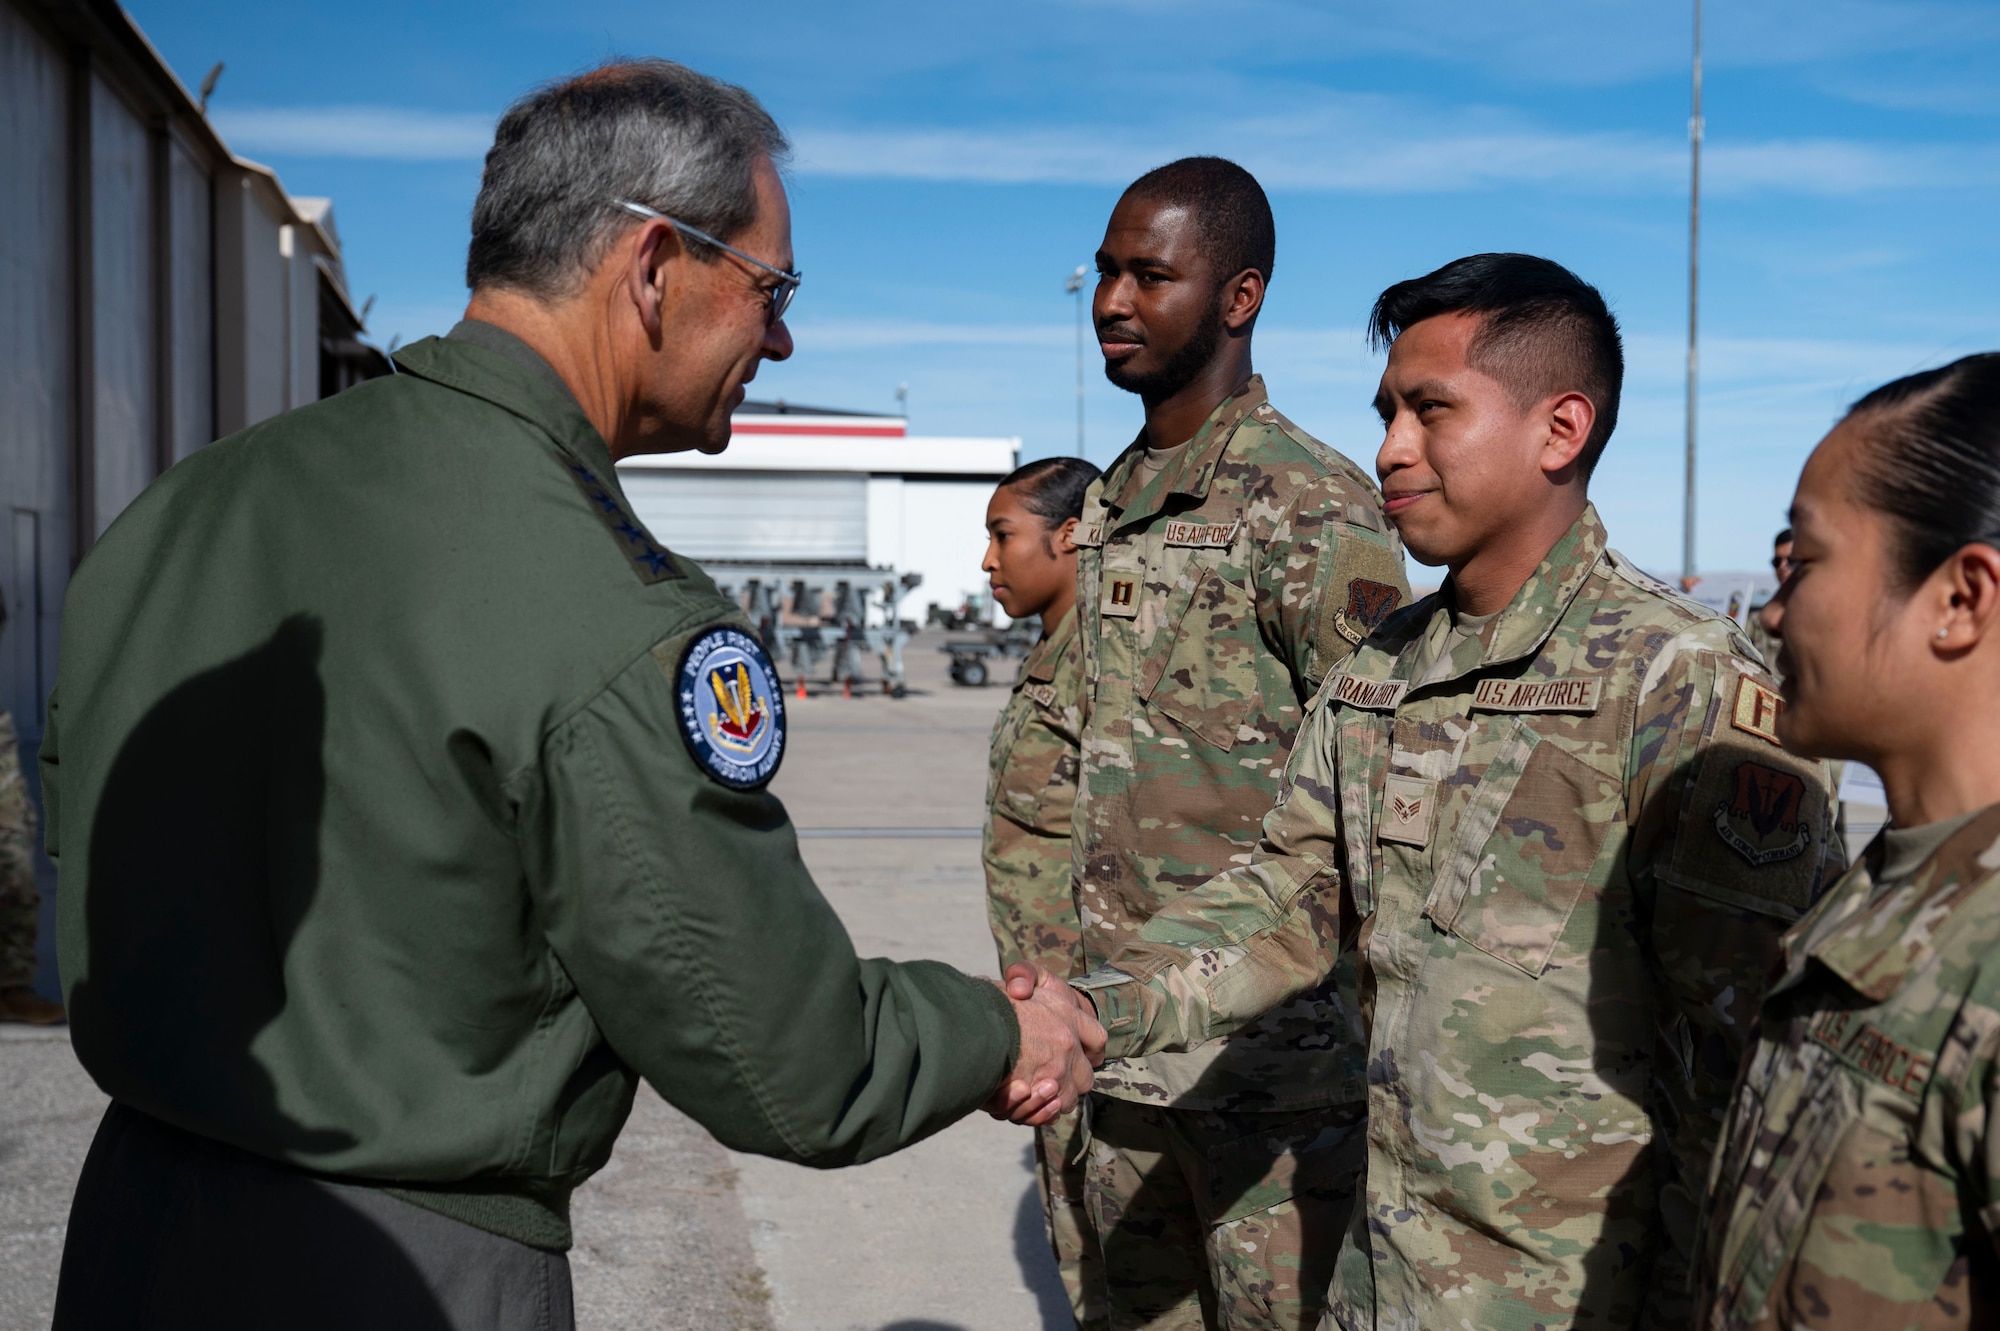 COMACC talking with Airmen